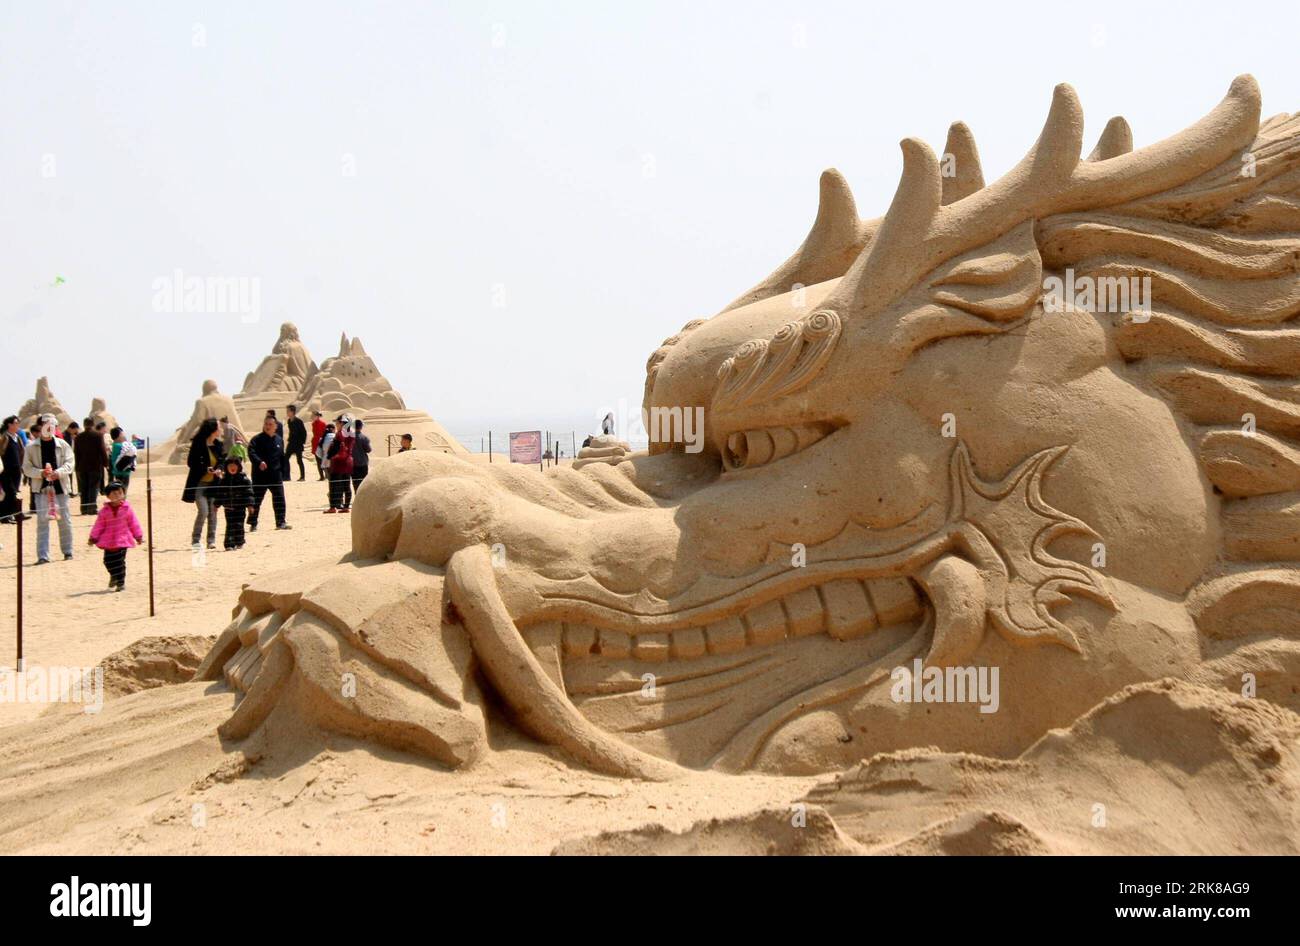 Bildnummer: 54006612  Datum: 01.05.2010  Copyright: imago/Xinhua (100501) -- WEIHAI (SHANDONG), May 1, 2010 (Xinhua) -- come to see sand sculptures at the Nanhai Park in the costal city of Wendeng, Weihai region, east China s Shandong Province, May 1, 2010. The third Weihai Sand Sculpture Festival opened on Saturday showing some 34 works of sculptures. (Xinhua/Yu Qibo) (wyx) CHINA-SHANGDONG-SAND SCULPTURE (CN) PUBLICATIONxNOTxINxCHN Gesellschaft Sandskulptur Sandskulpturen kbdig xsk 2010 quer    Bildnummer 54006612 Date 01 05 2010 Copyright Imago XINHUA  Weihai Shan Dong May 1 2010 XINHUA Come Stock Photo